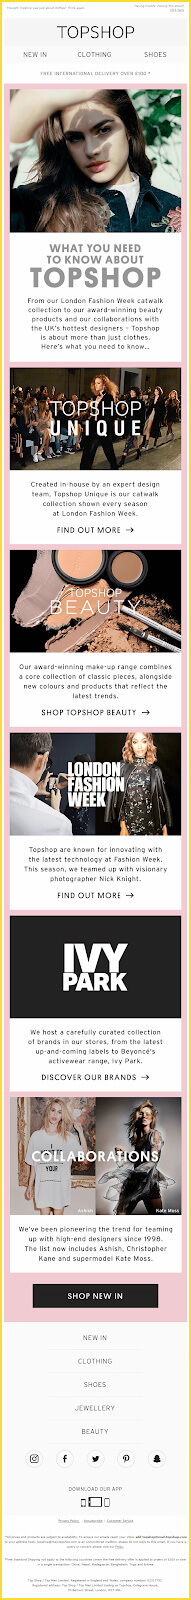 TopShop welcome email 4